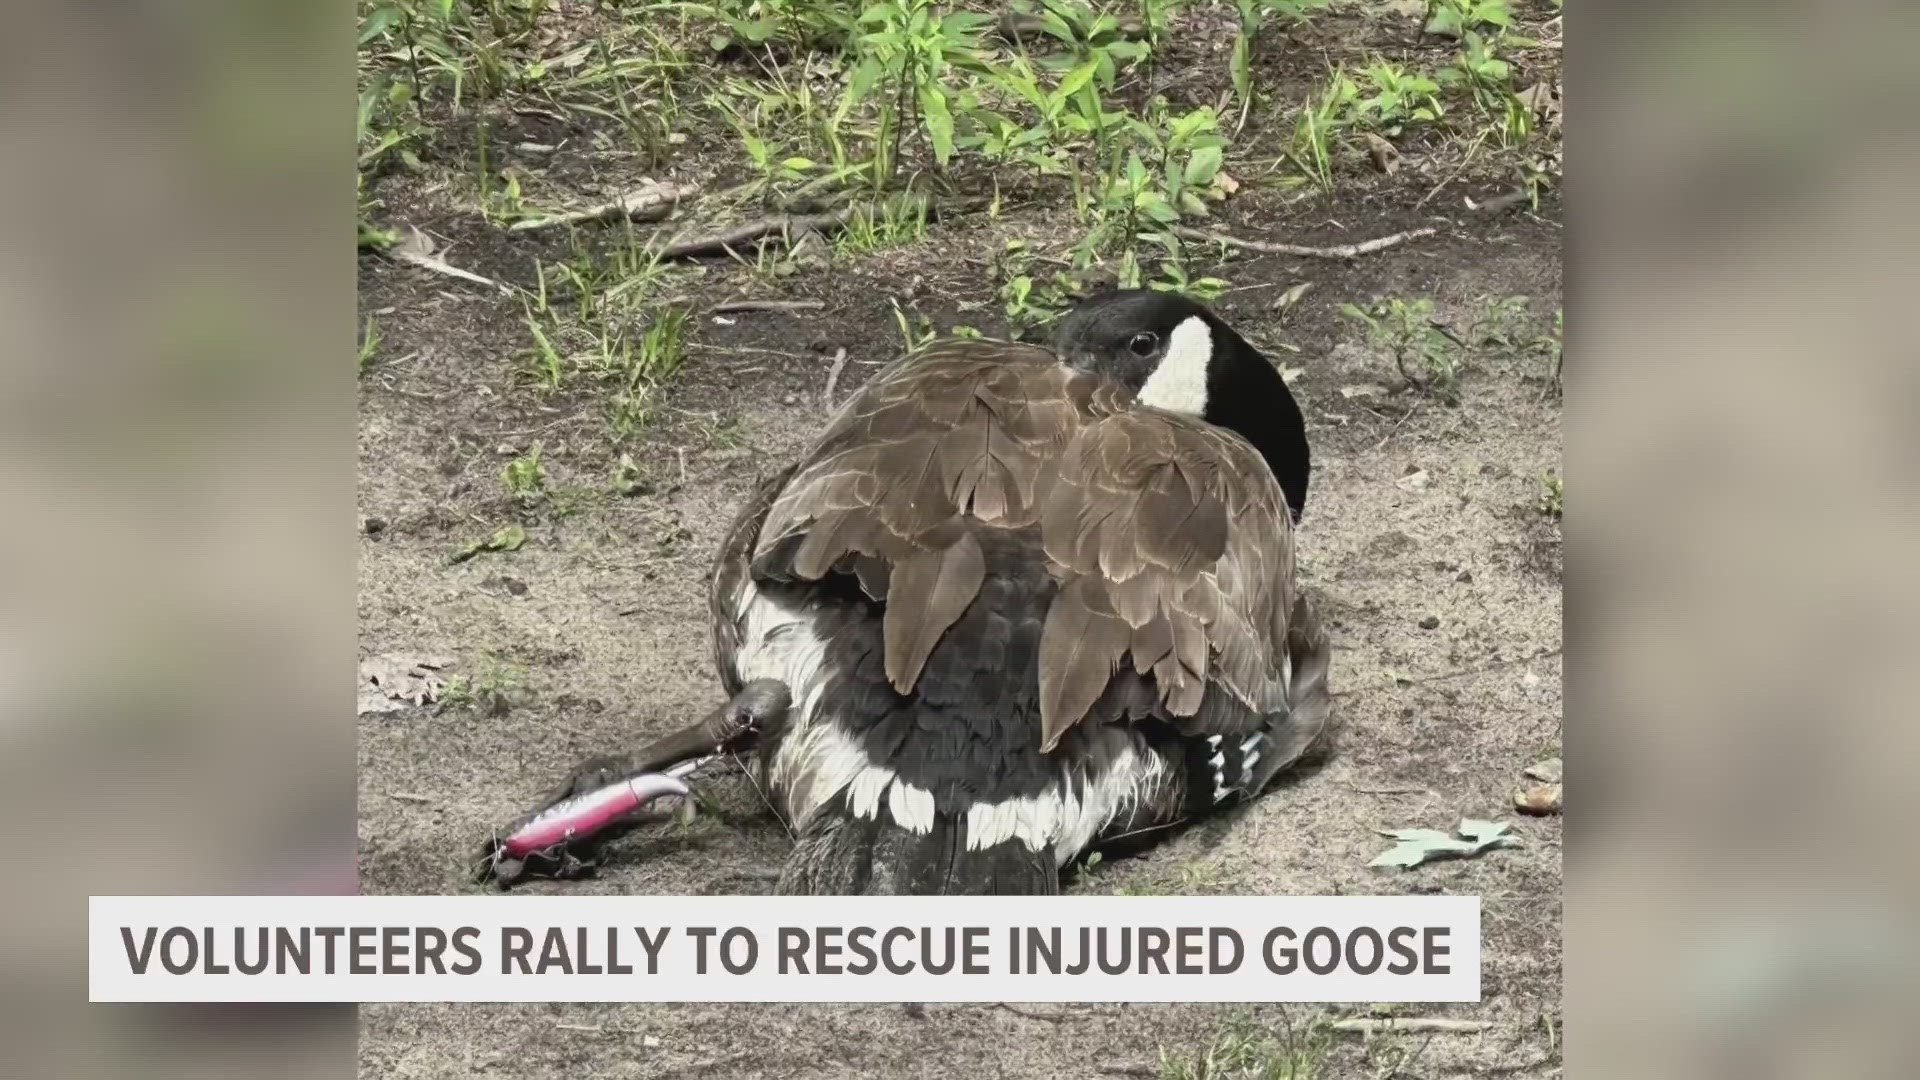 A Facebook post showing a goose lying on the ground with a fishing lure in its foot sprung a community to action.